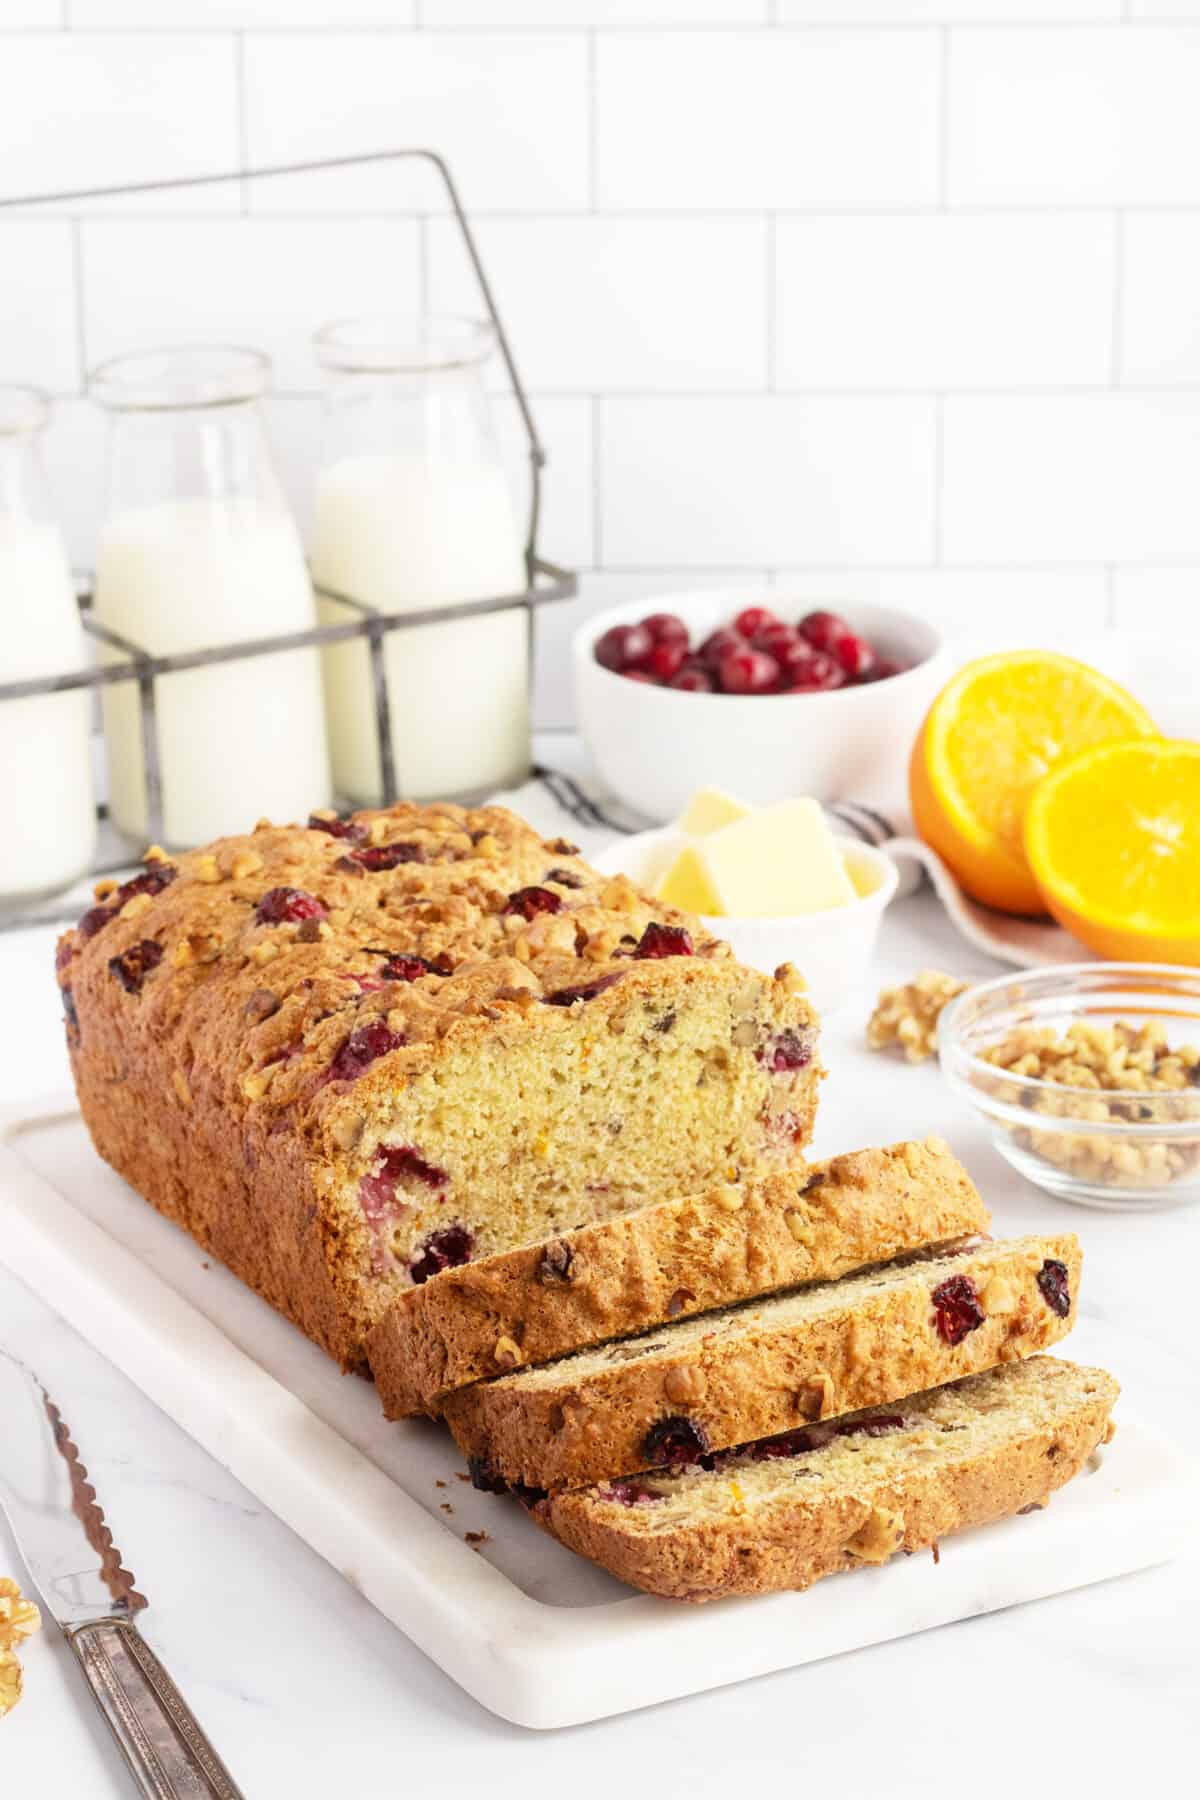 Cranberry nut bread sliced on white plate